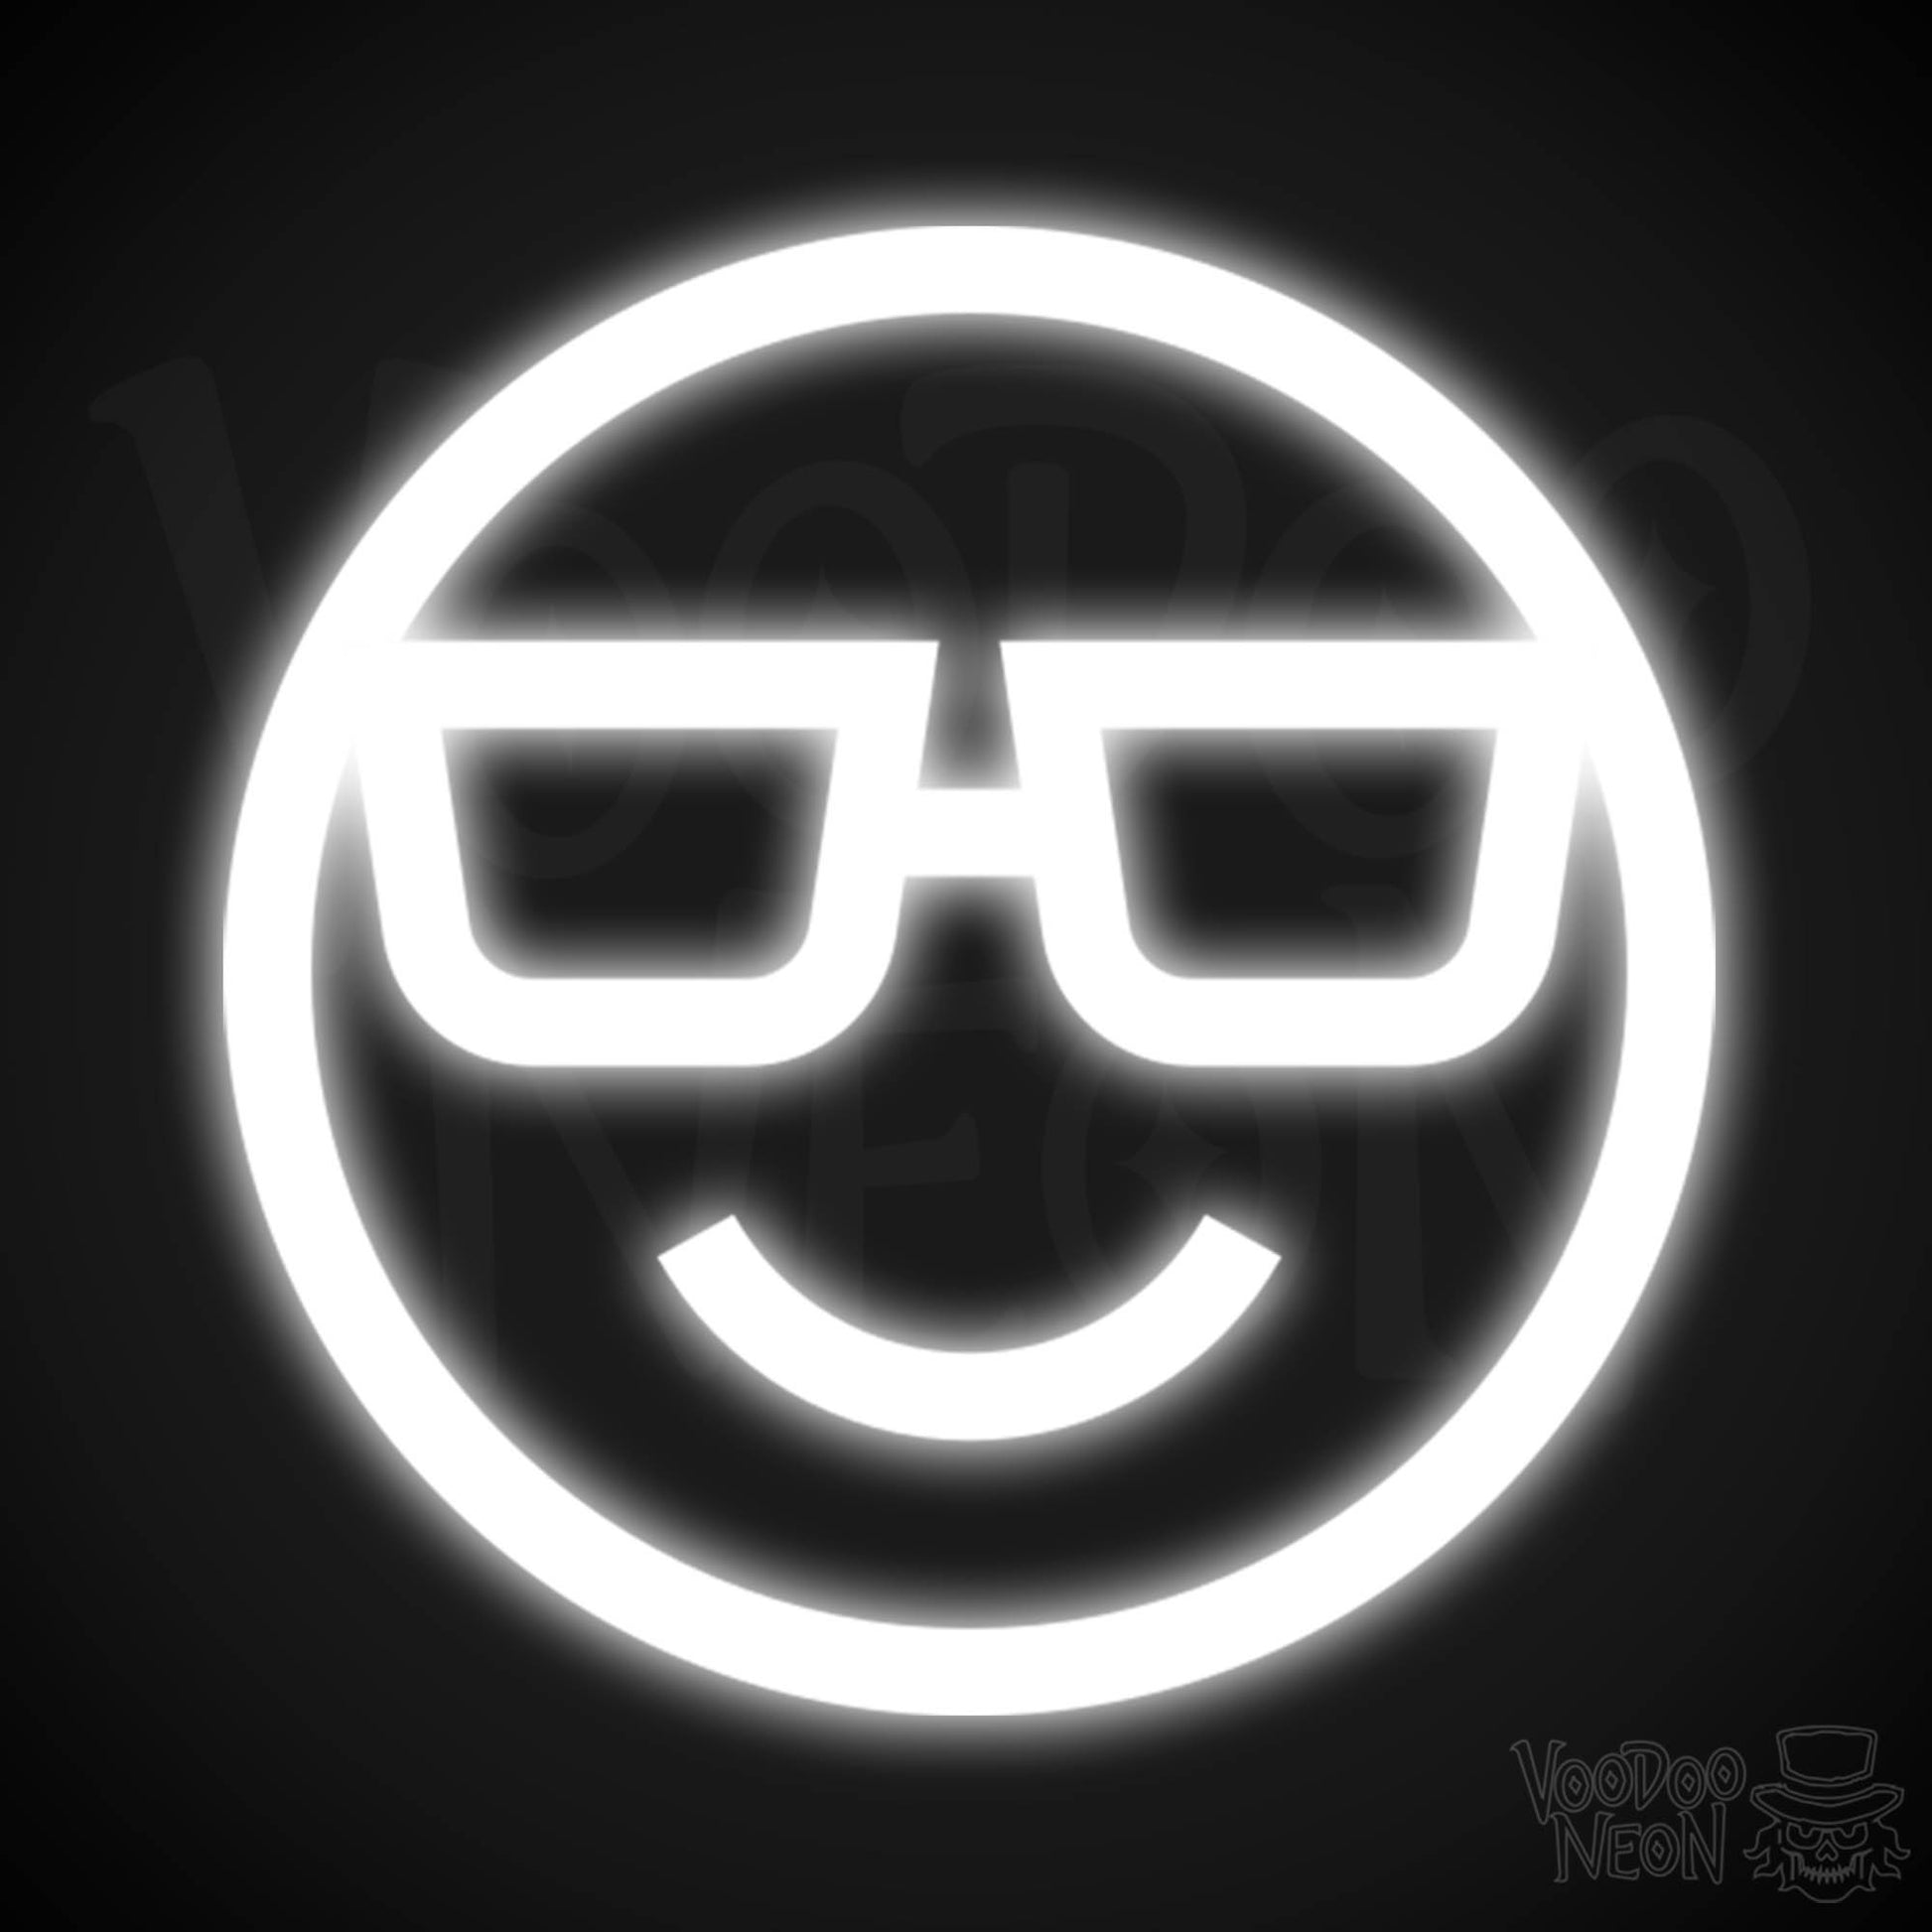 Neon Smiley Face - Smiley Face Neon Sign - LED Wall Art - Color White